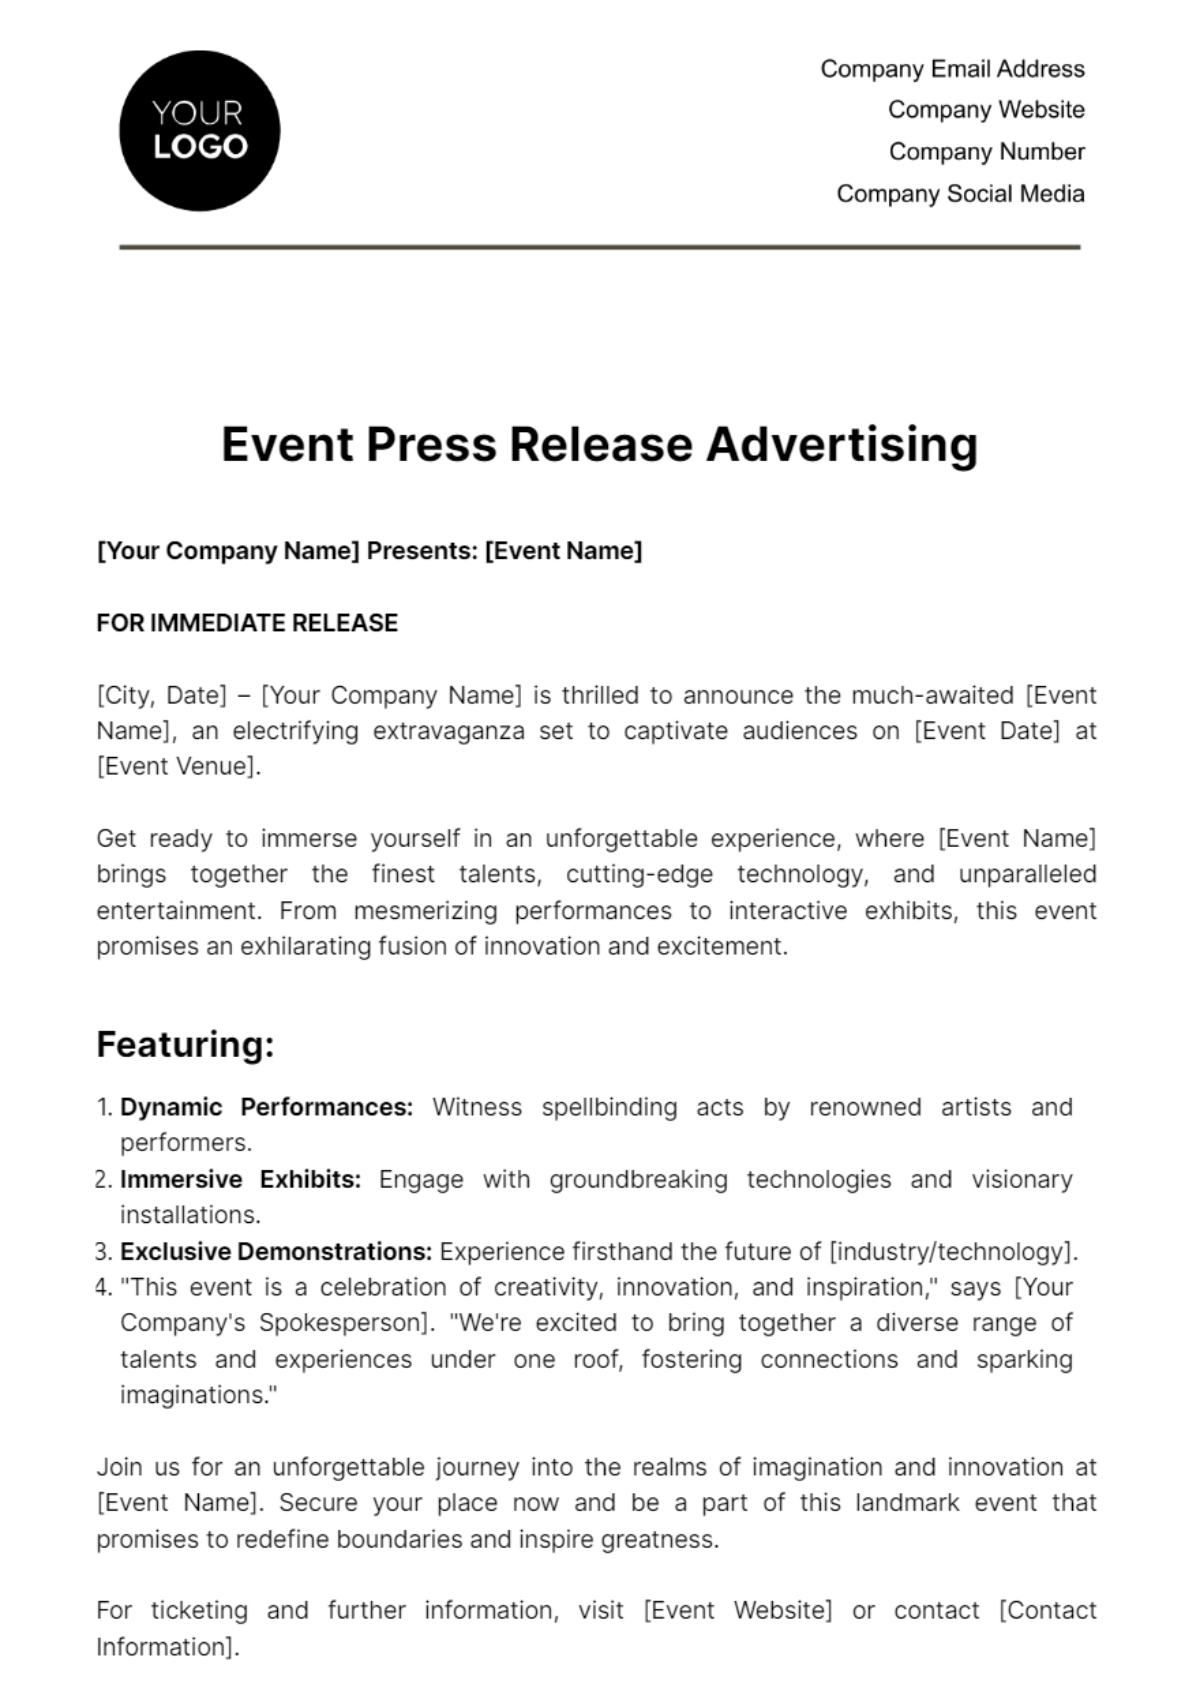 Event Press Release Advertising Template